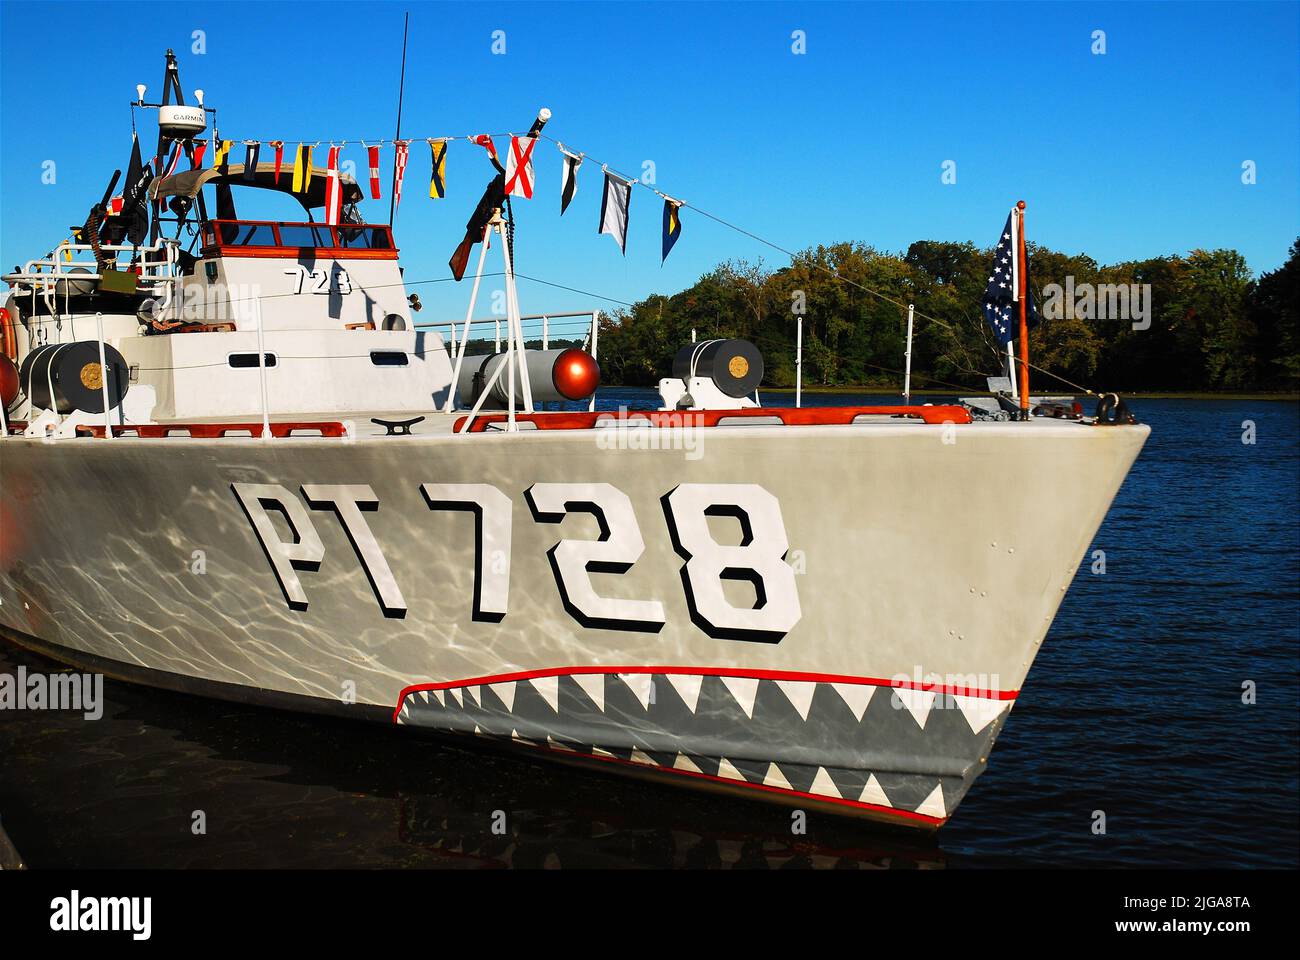 PT Boat 728, a historic United States Navy torpedo ship from World War II, is moored at a maritime museum Stock Photo